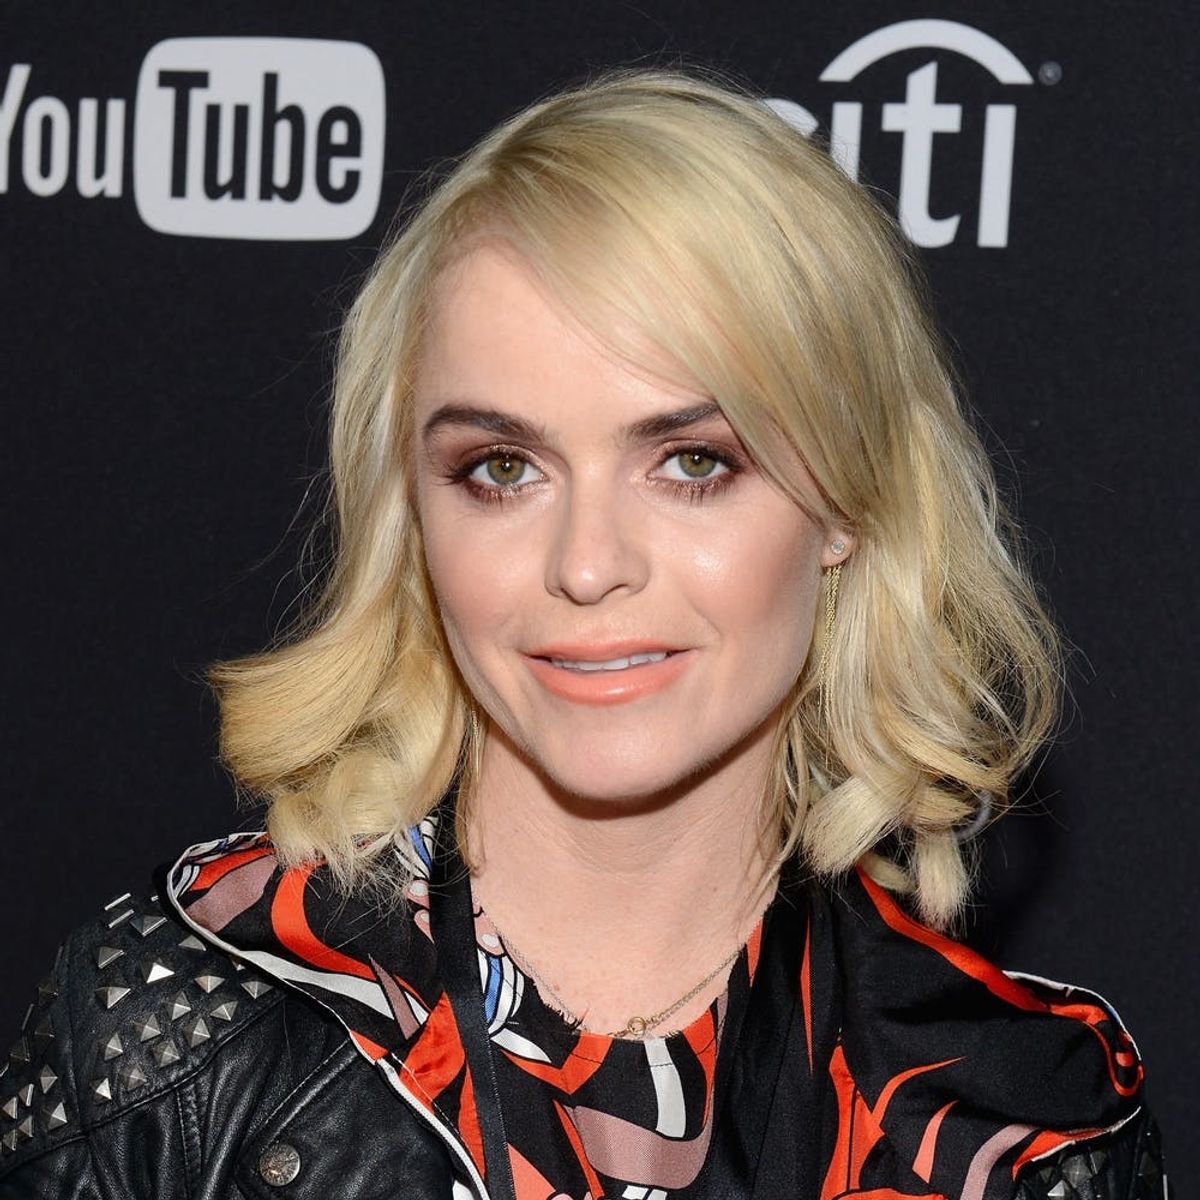 OITNB’s Taryn Manning Rang in the New Year With This Unexpected Hair Color